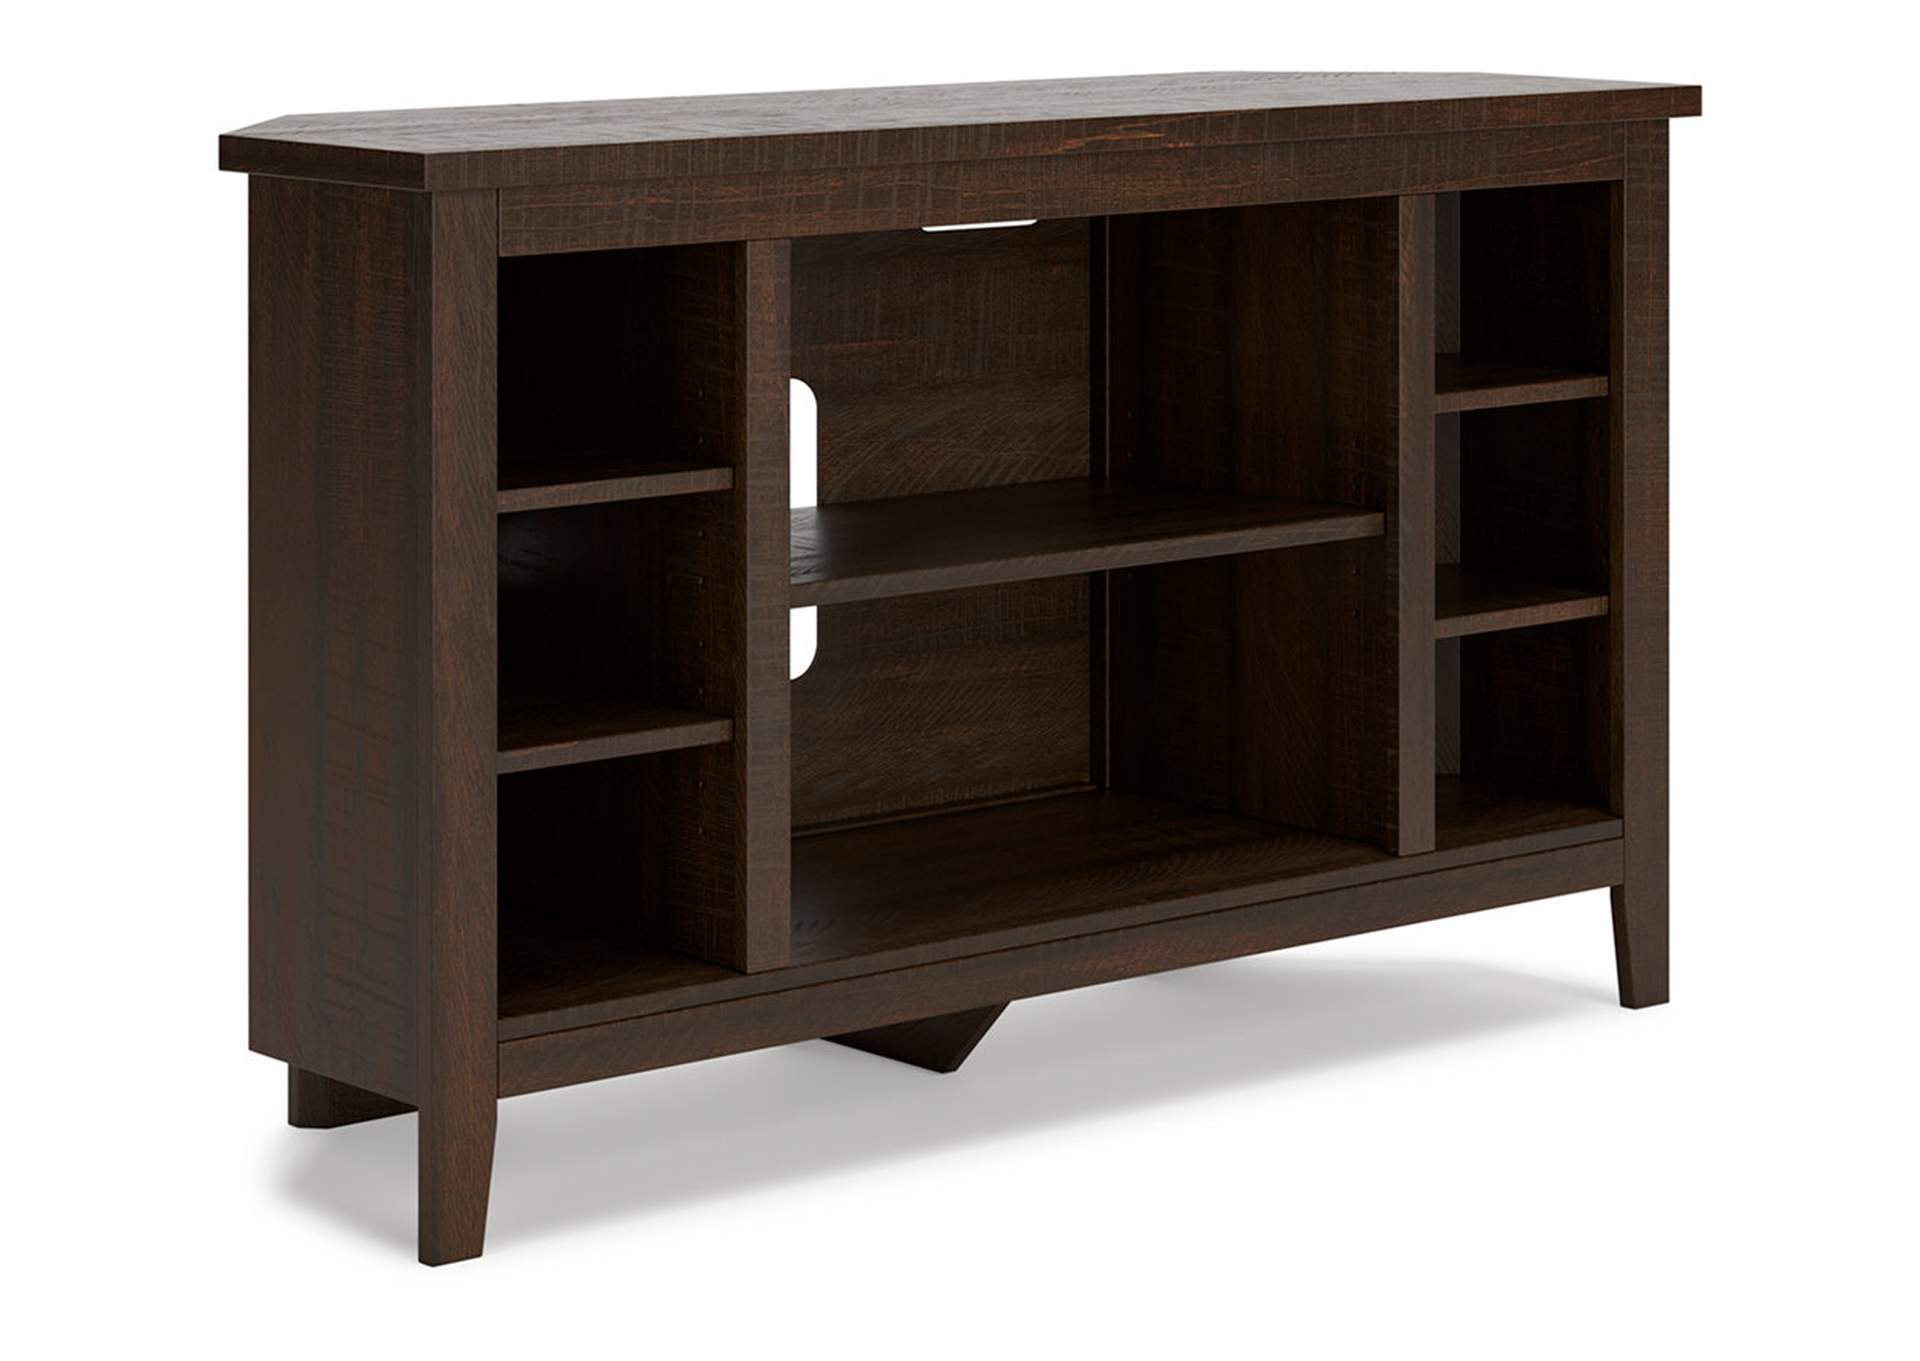 Camiburg Corner TV Stand with Electric Fireplace,Signature Design By Ashley